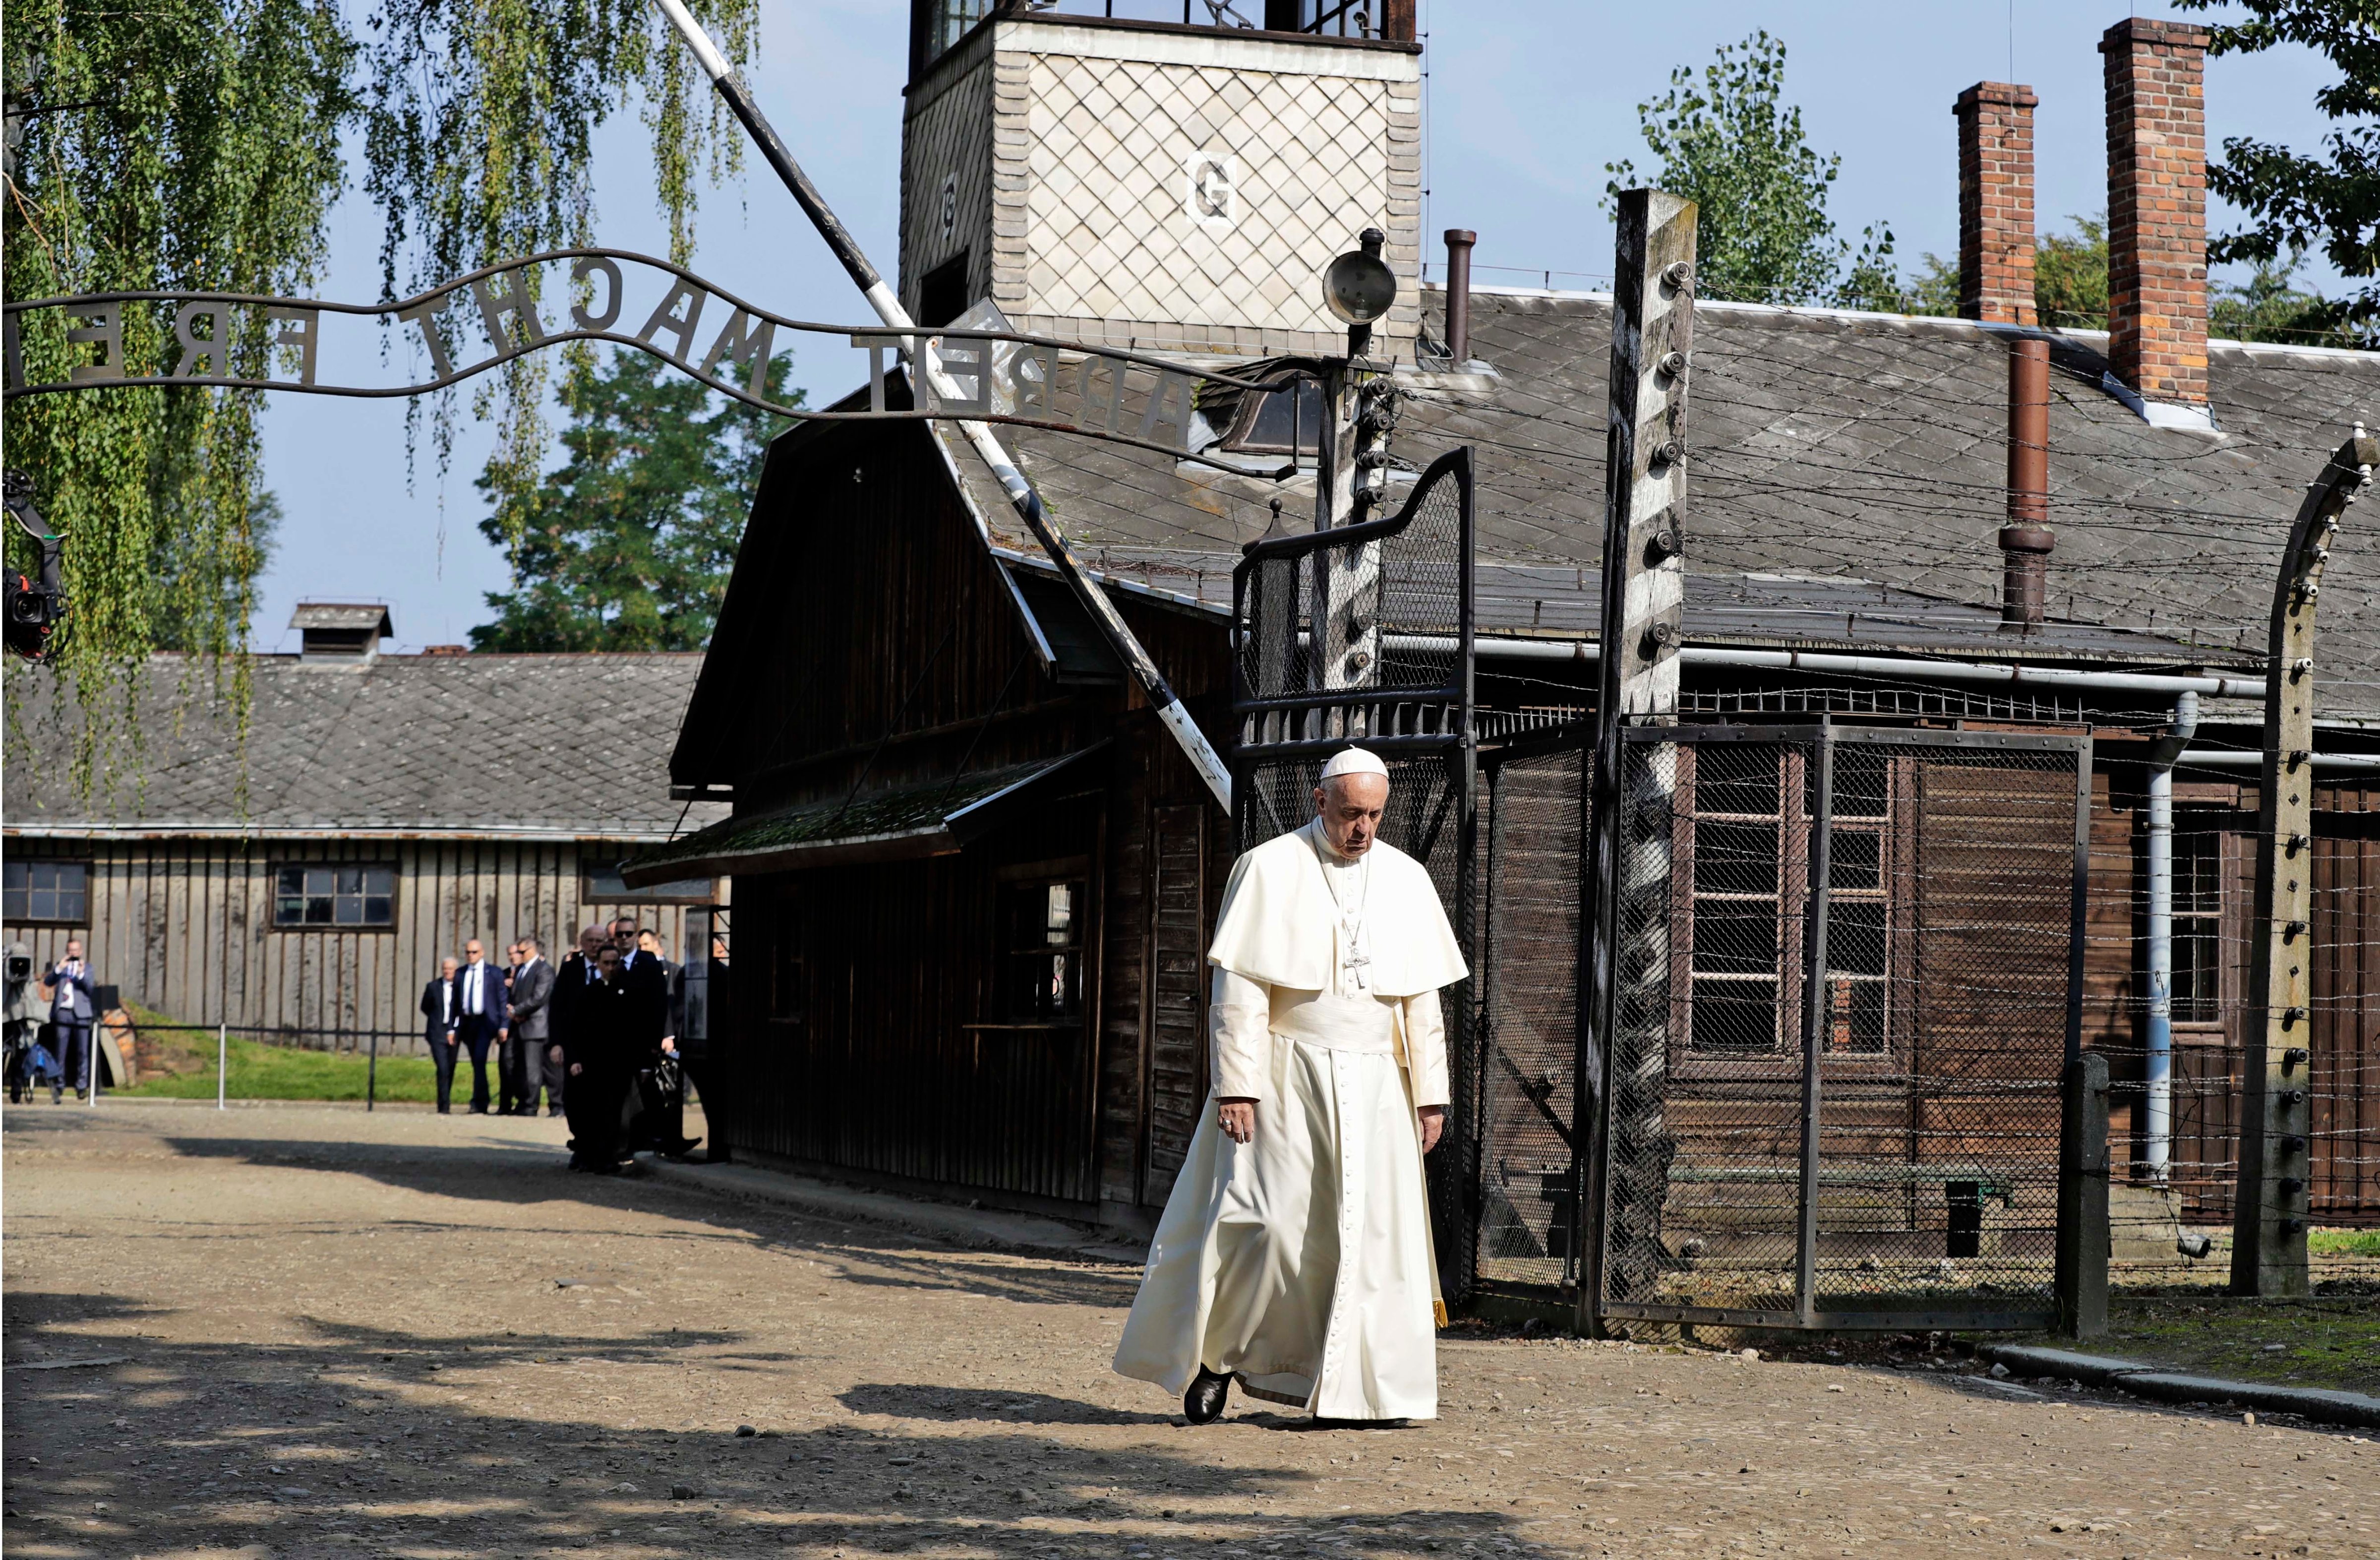 Pope Francis walks through the gate of the former Nazi German death camp of Auschwitz in Oswiecim, Poland on Friday, July 29, 2016. (Gregorio Borgia—AP)